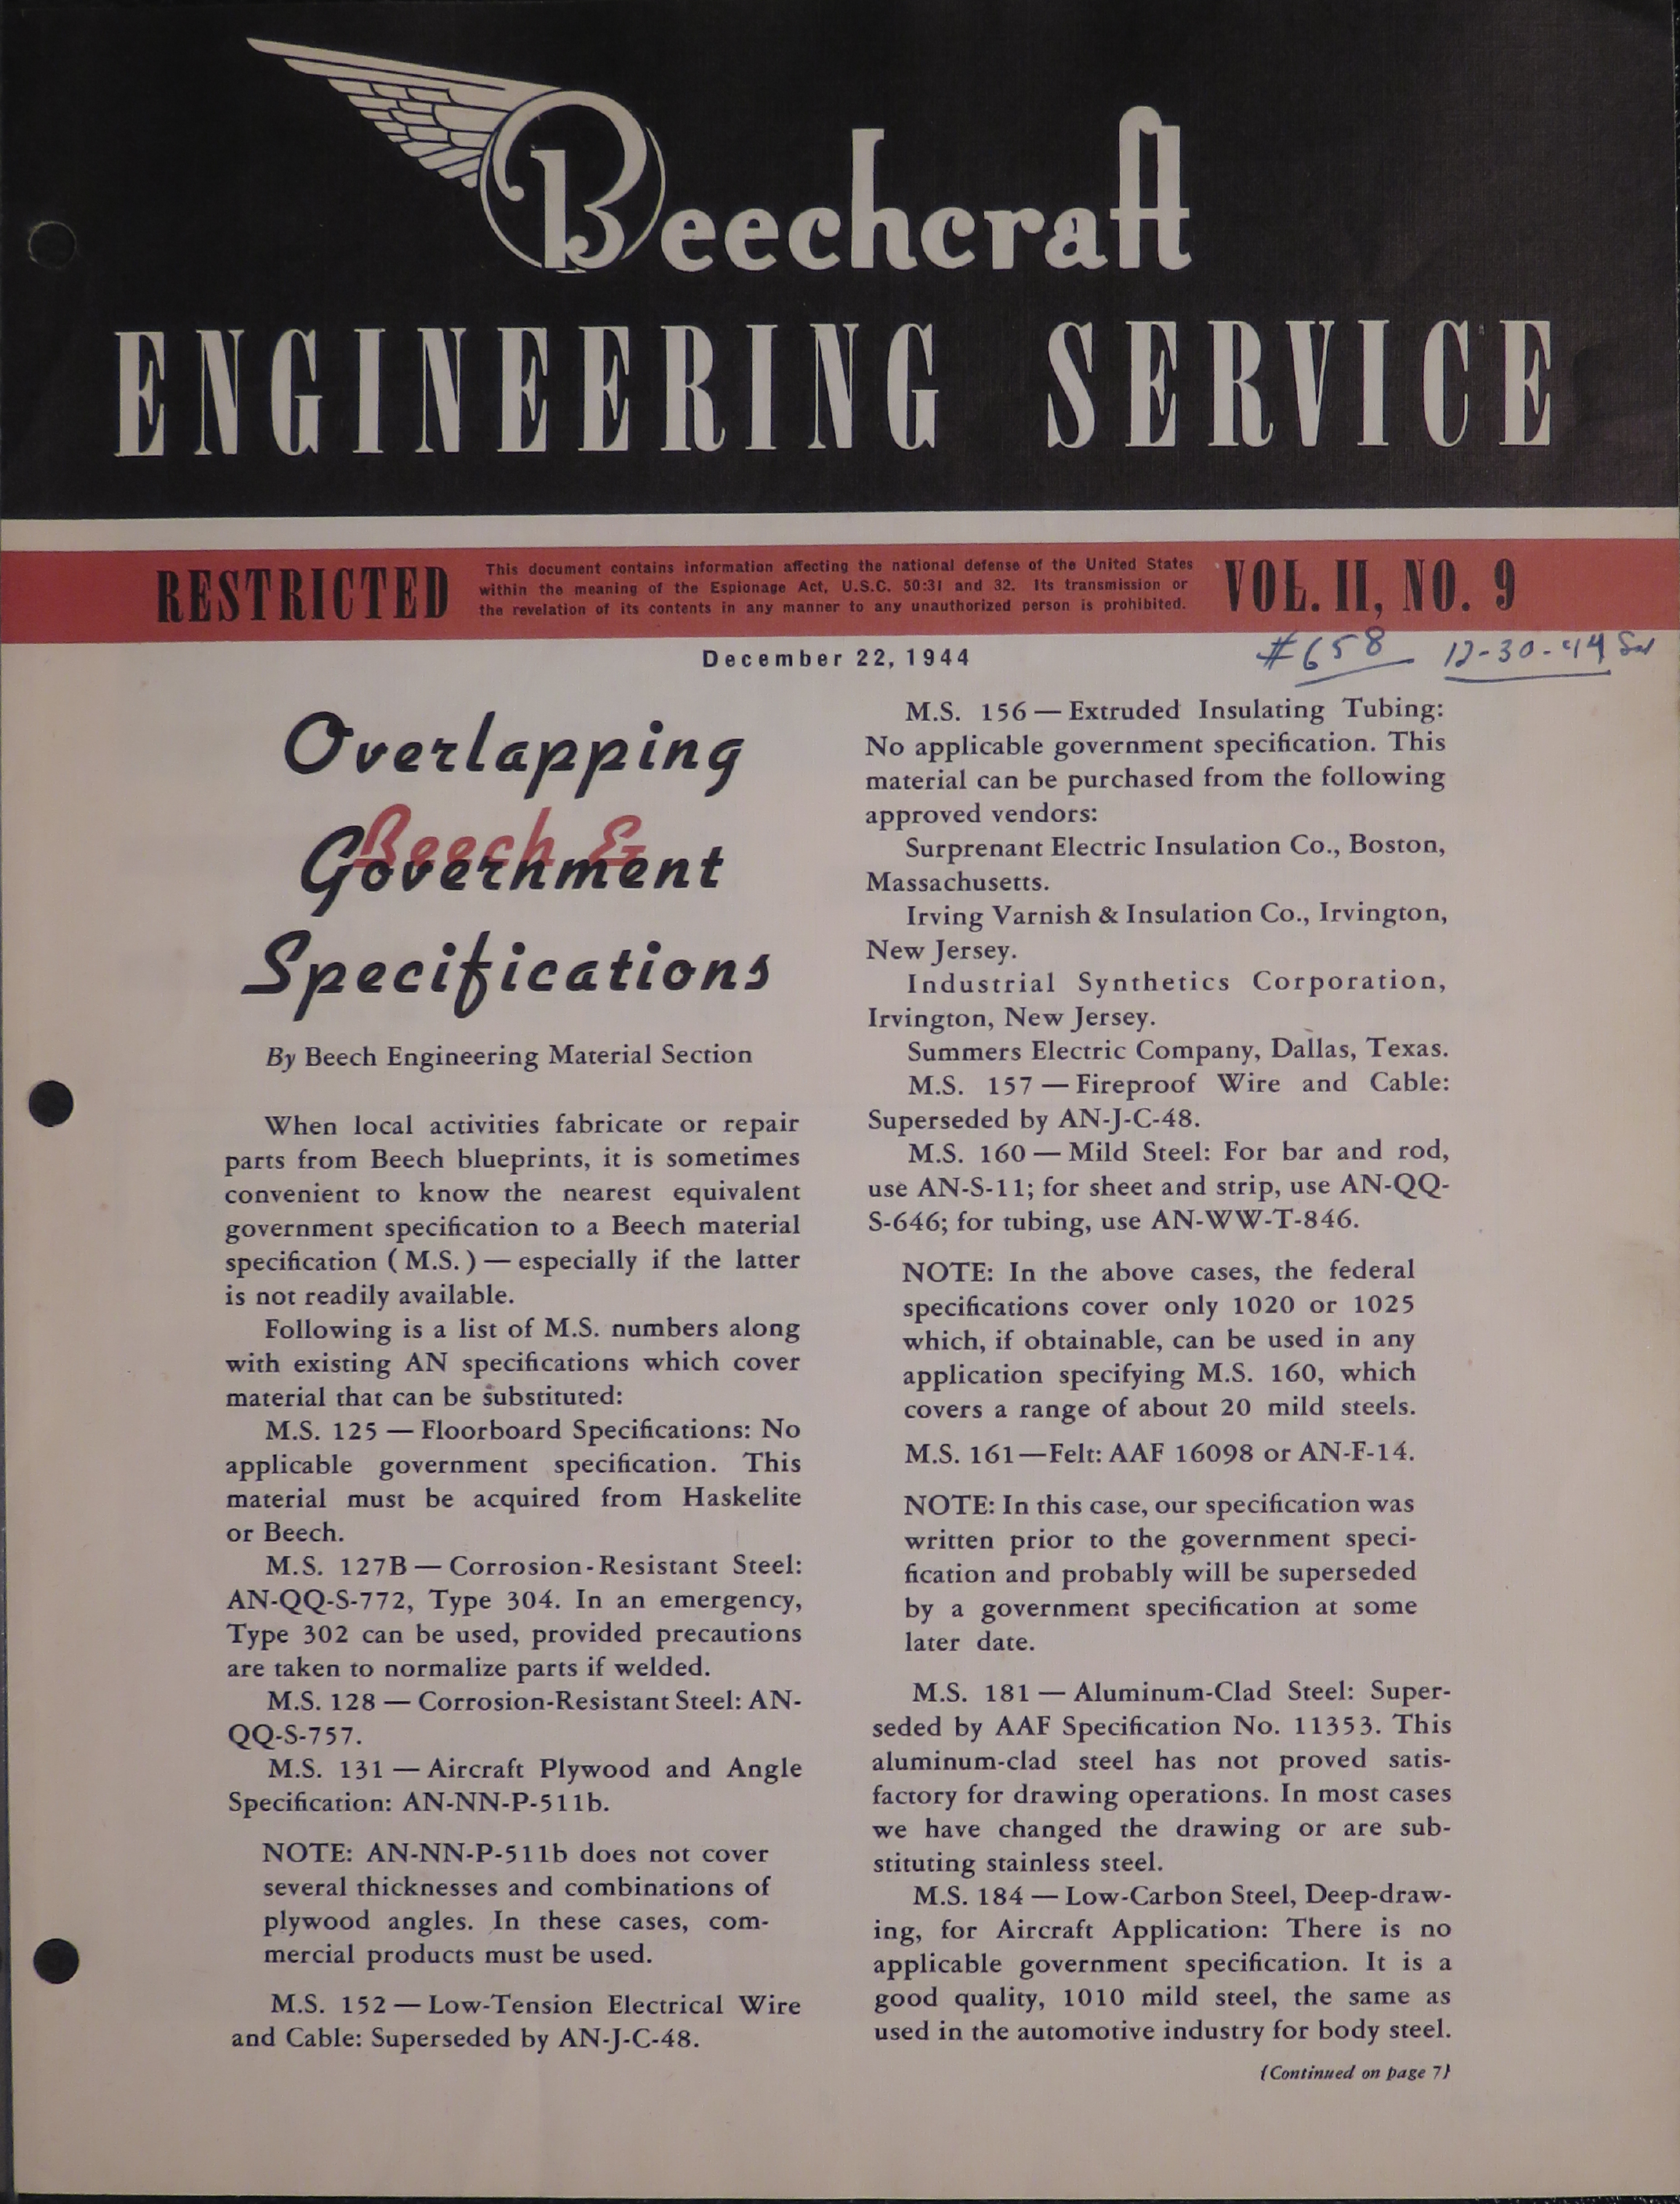 Sample page 1 from AirCorps Library document: Vol. II, No. 9 - Beechcraft Engineering Service